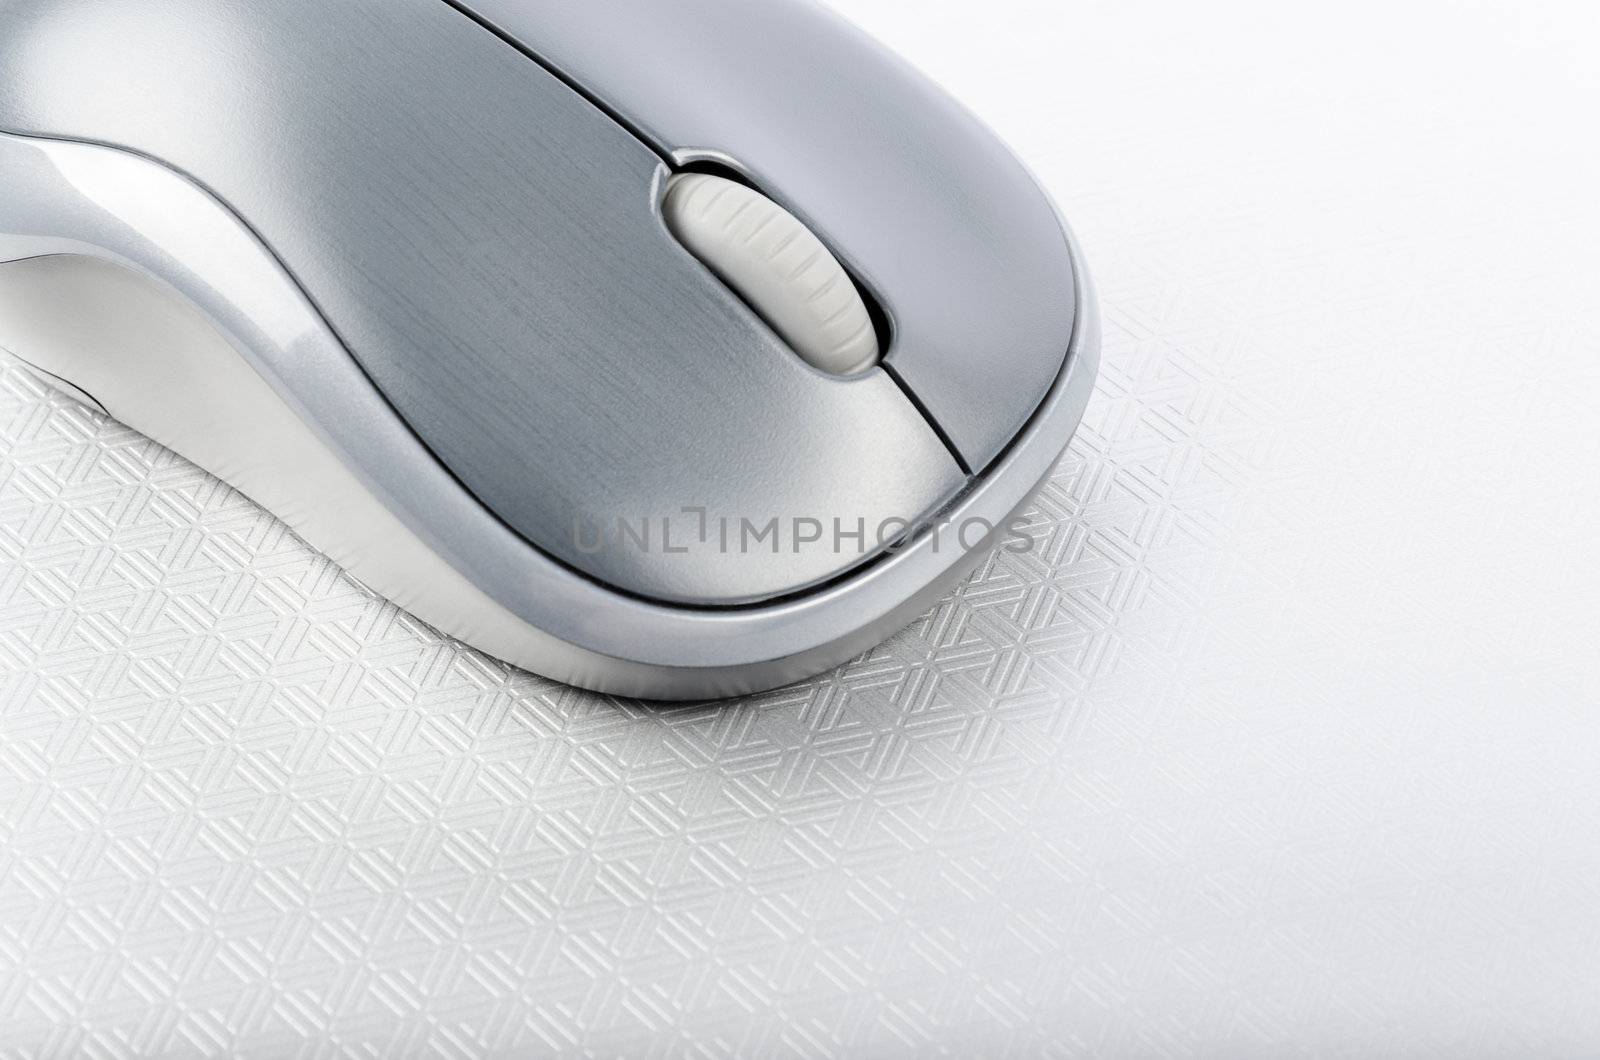 Wireless computer mouse on a metallic background by velislava